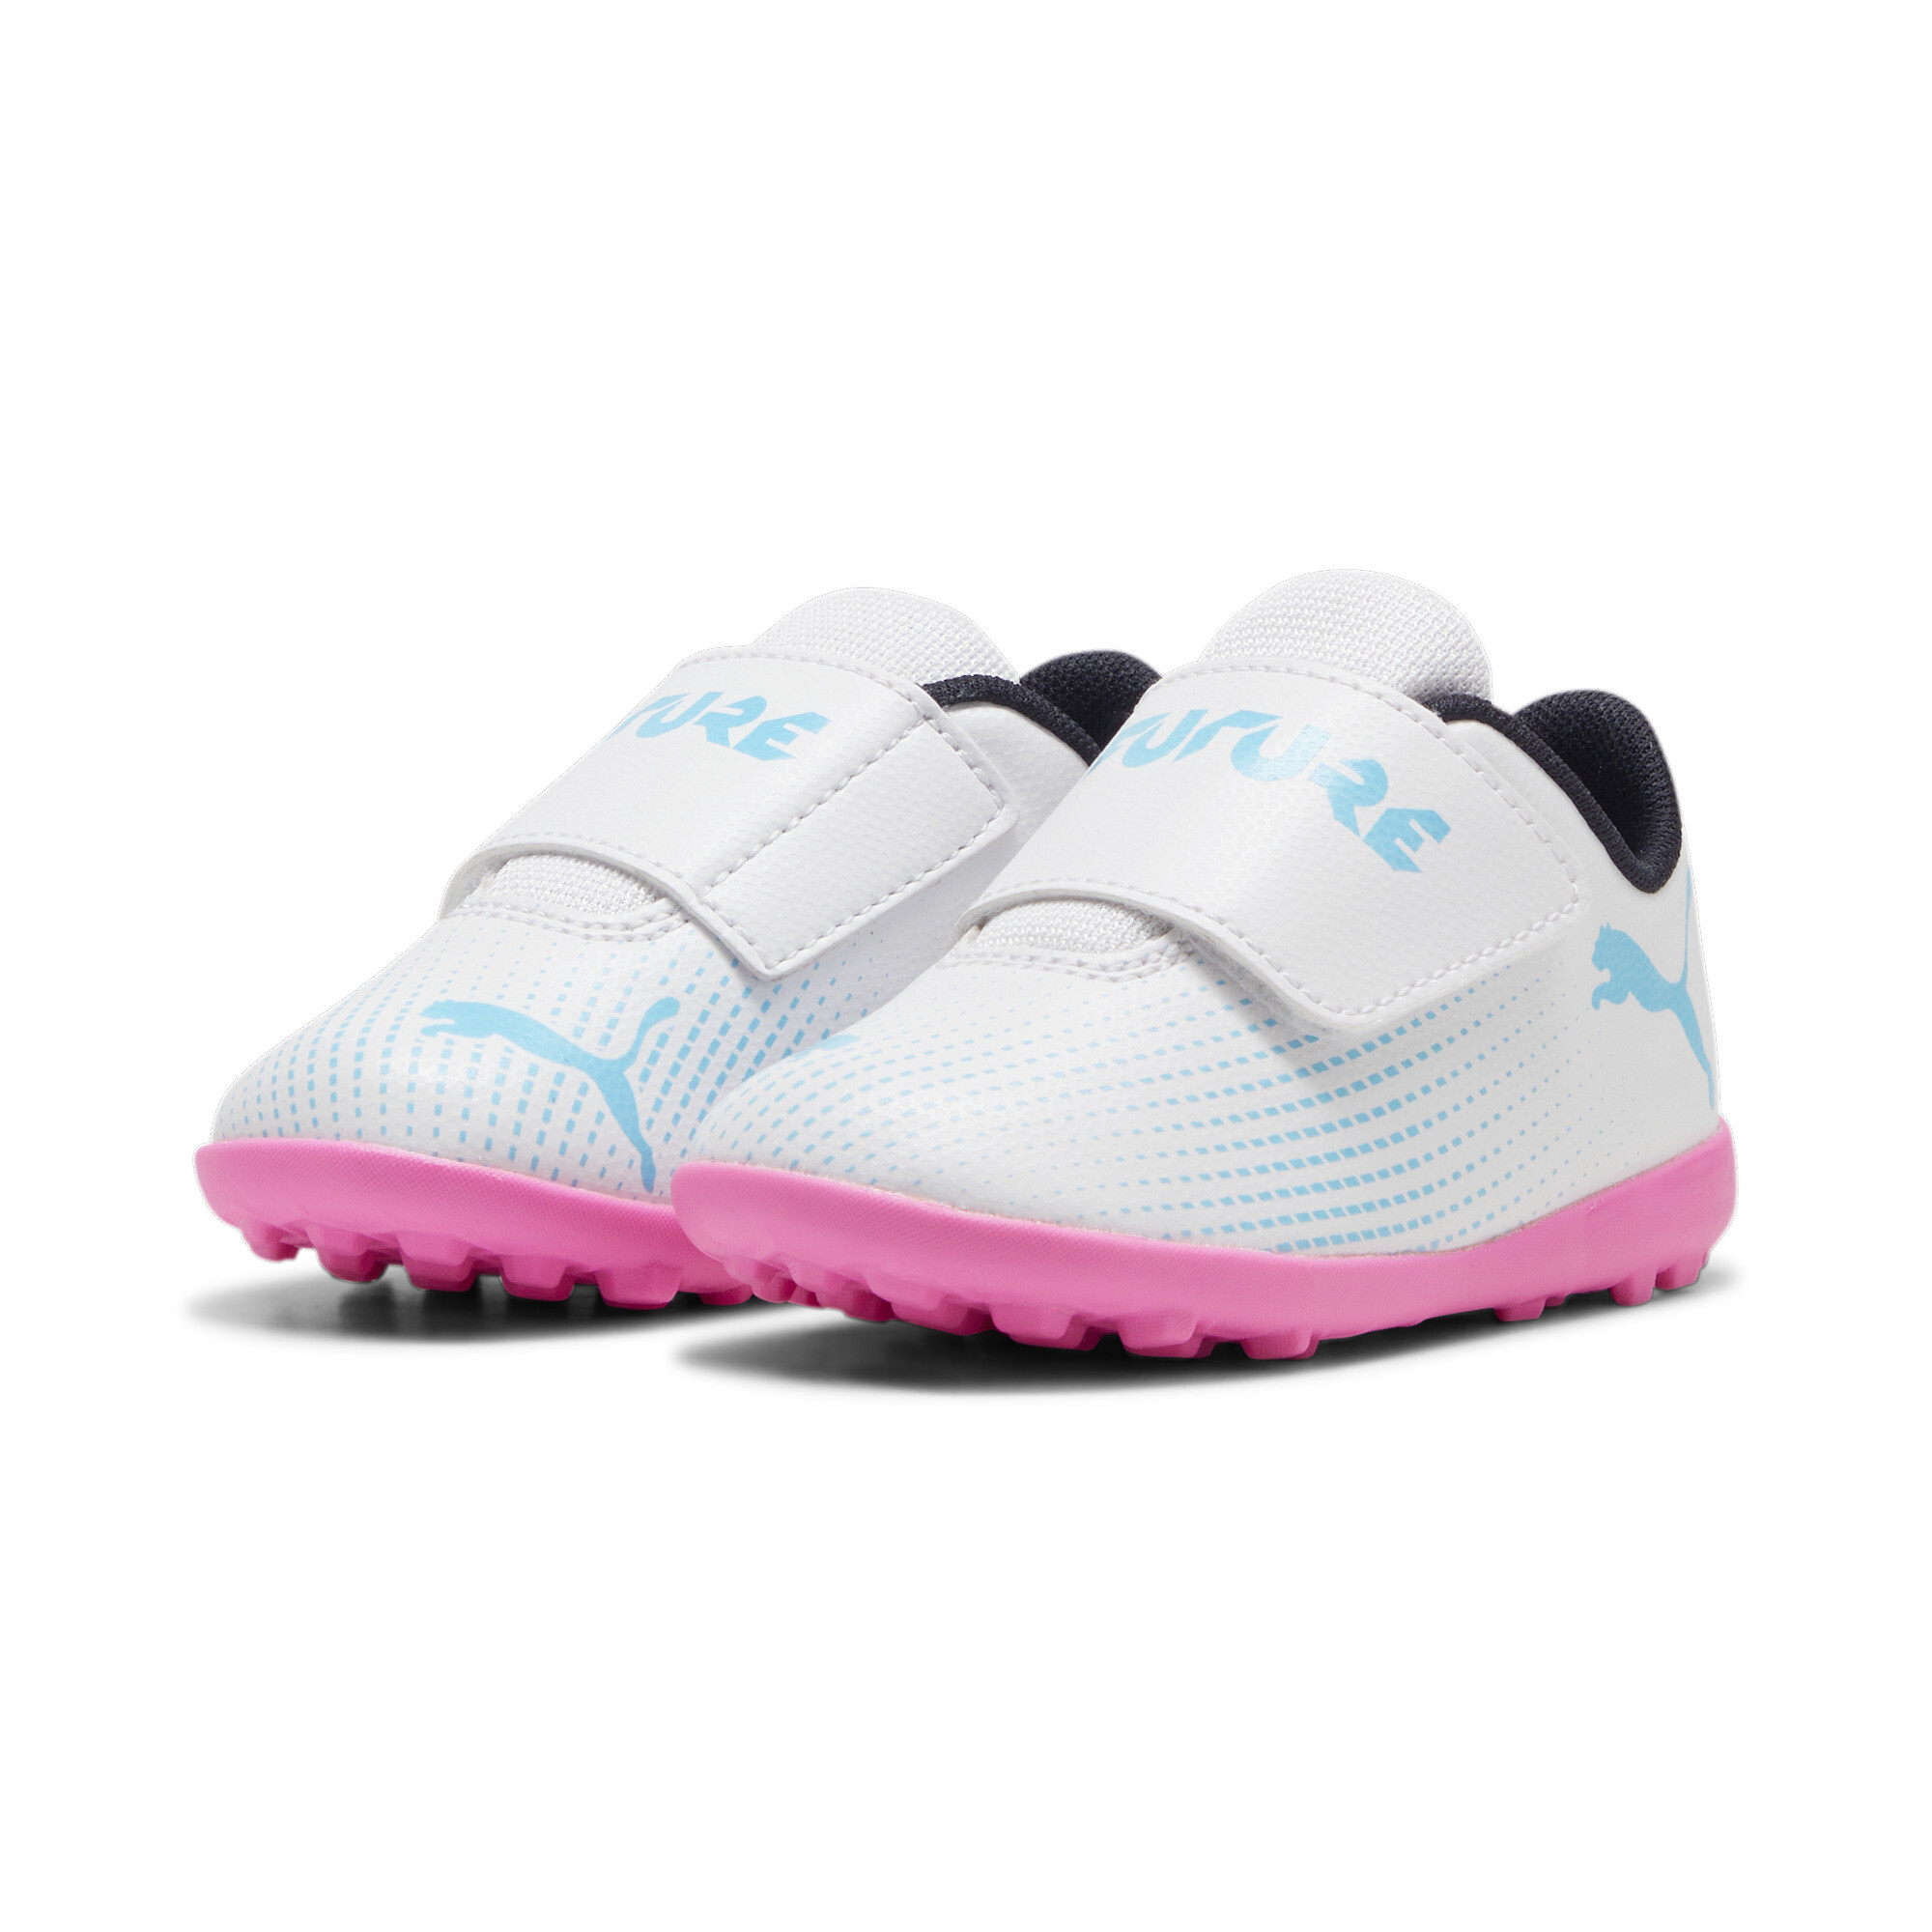 Kids' PUMA FUTURE 7 PLAY TT Toddlers' Football Boots In White/Pink, Size EU 26